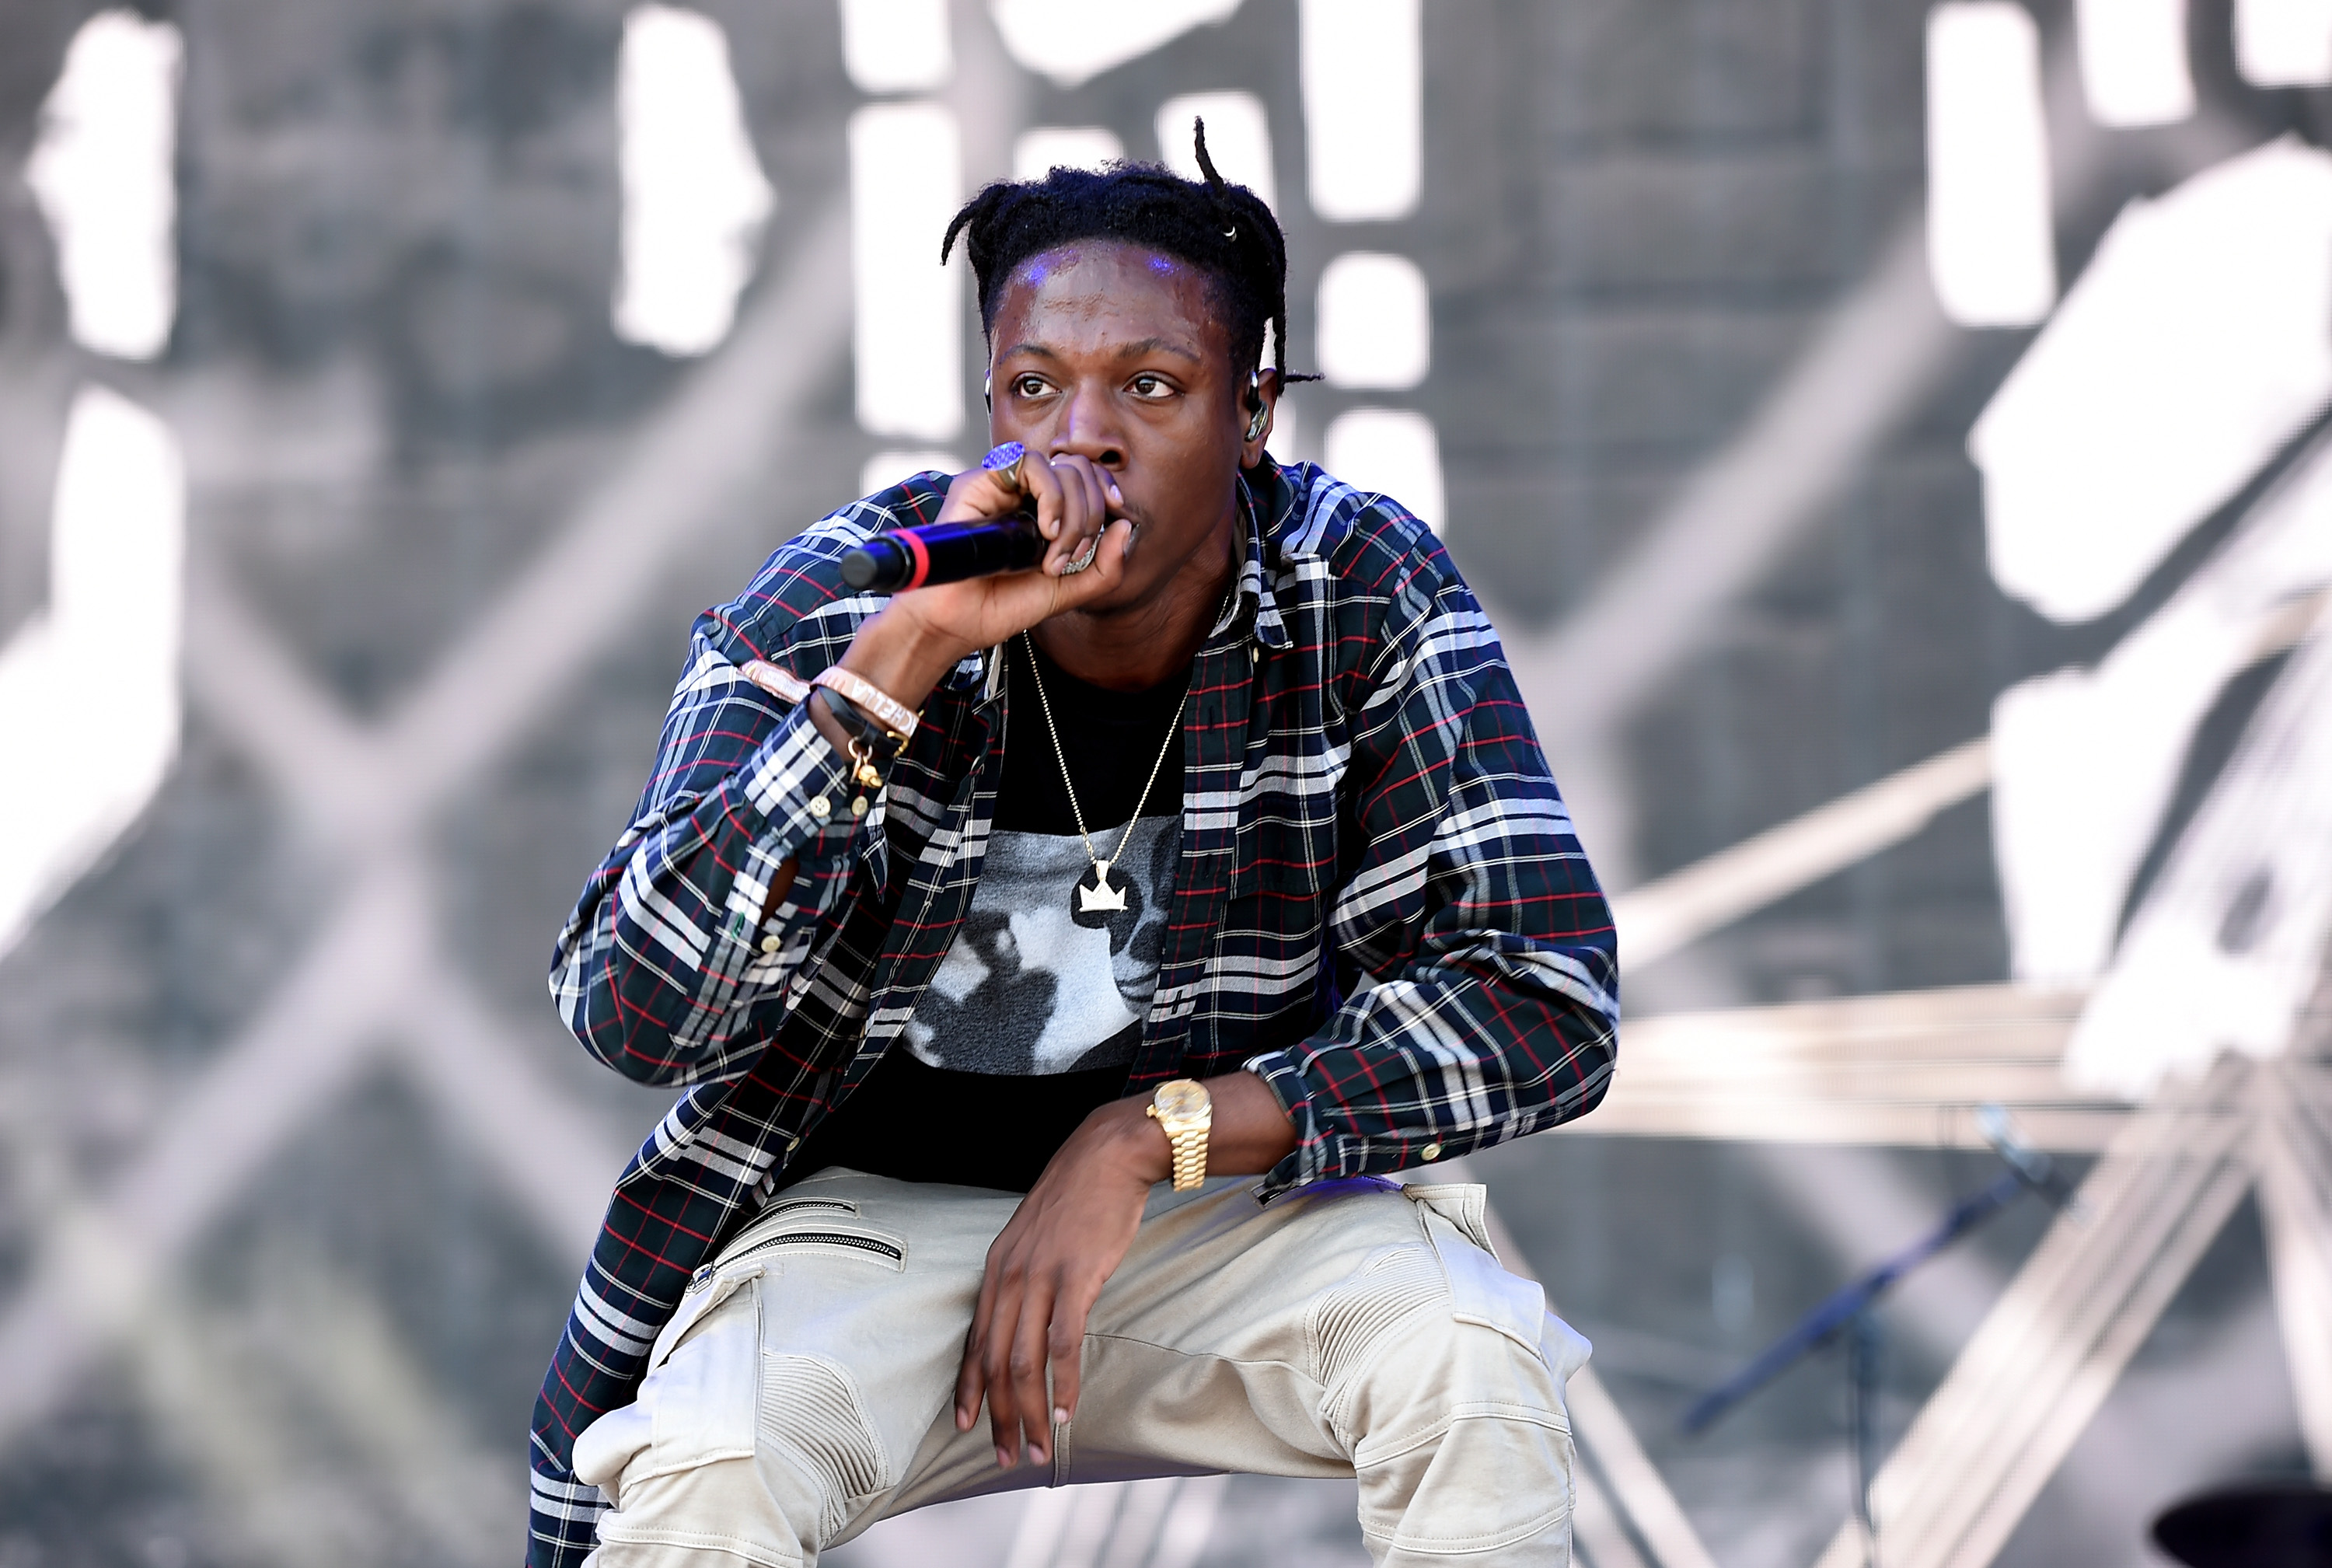 Joey Bada$$ at 2016 Coachella Valley Music And Arts Festival - Weekend 2 - Day 1